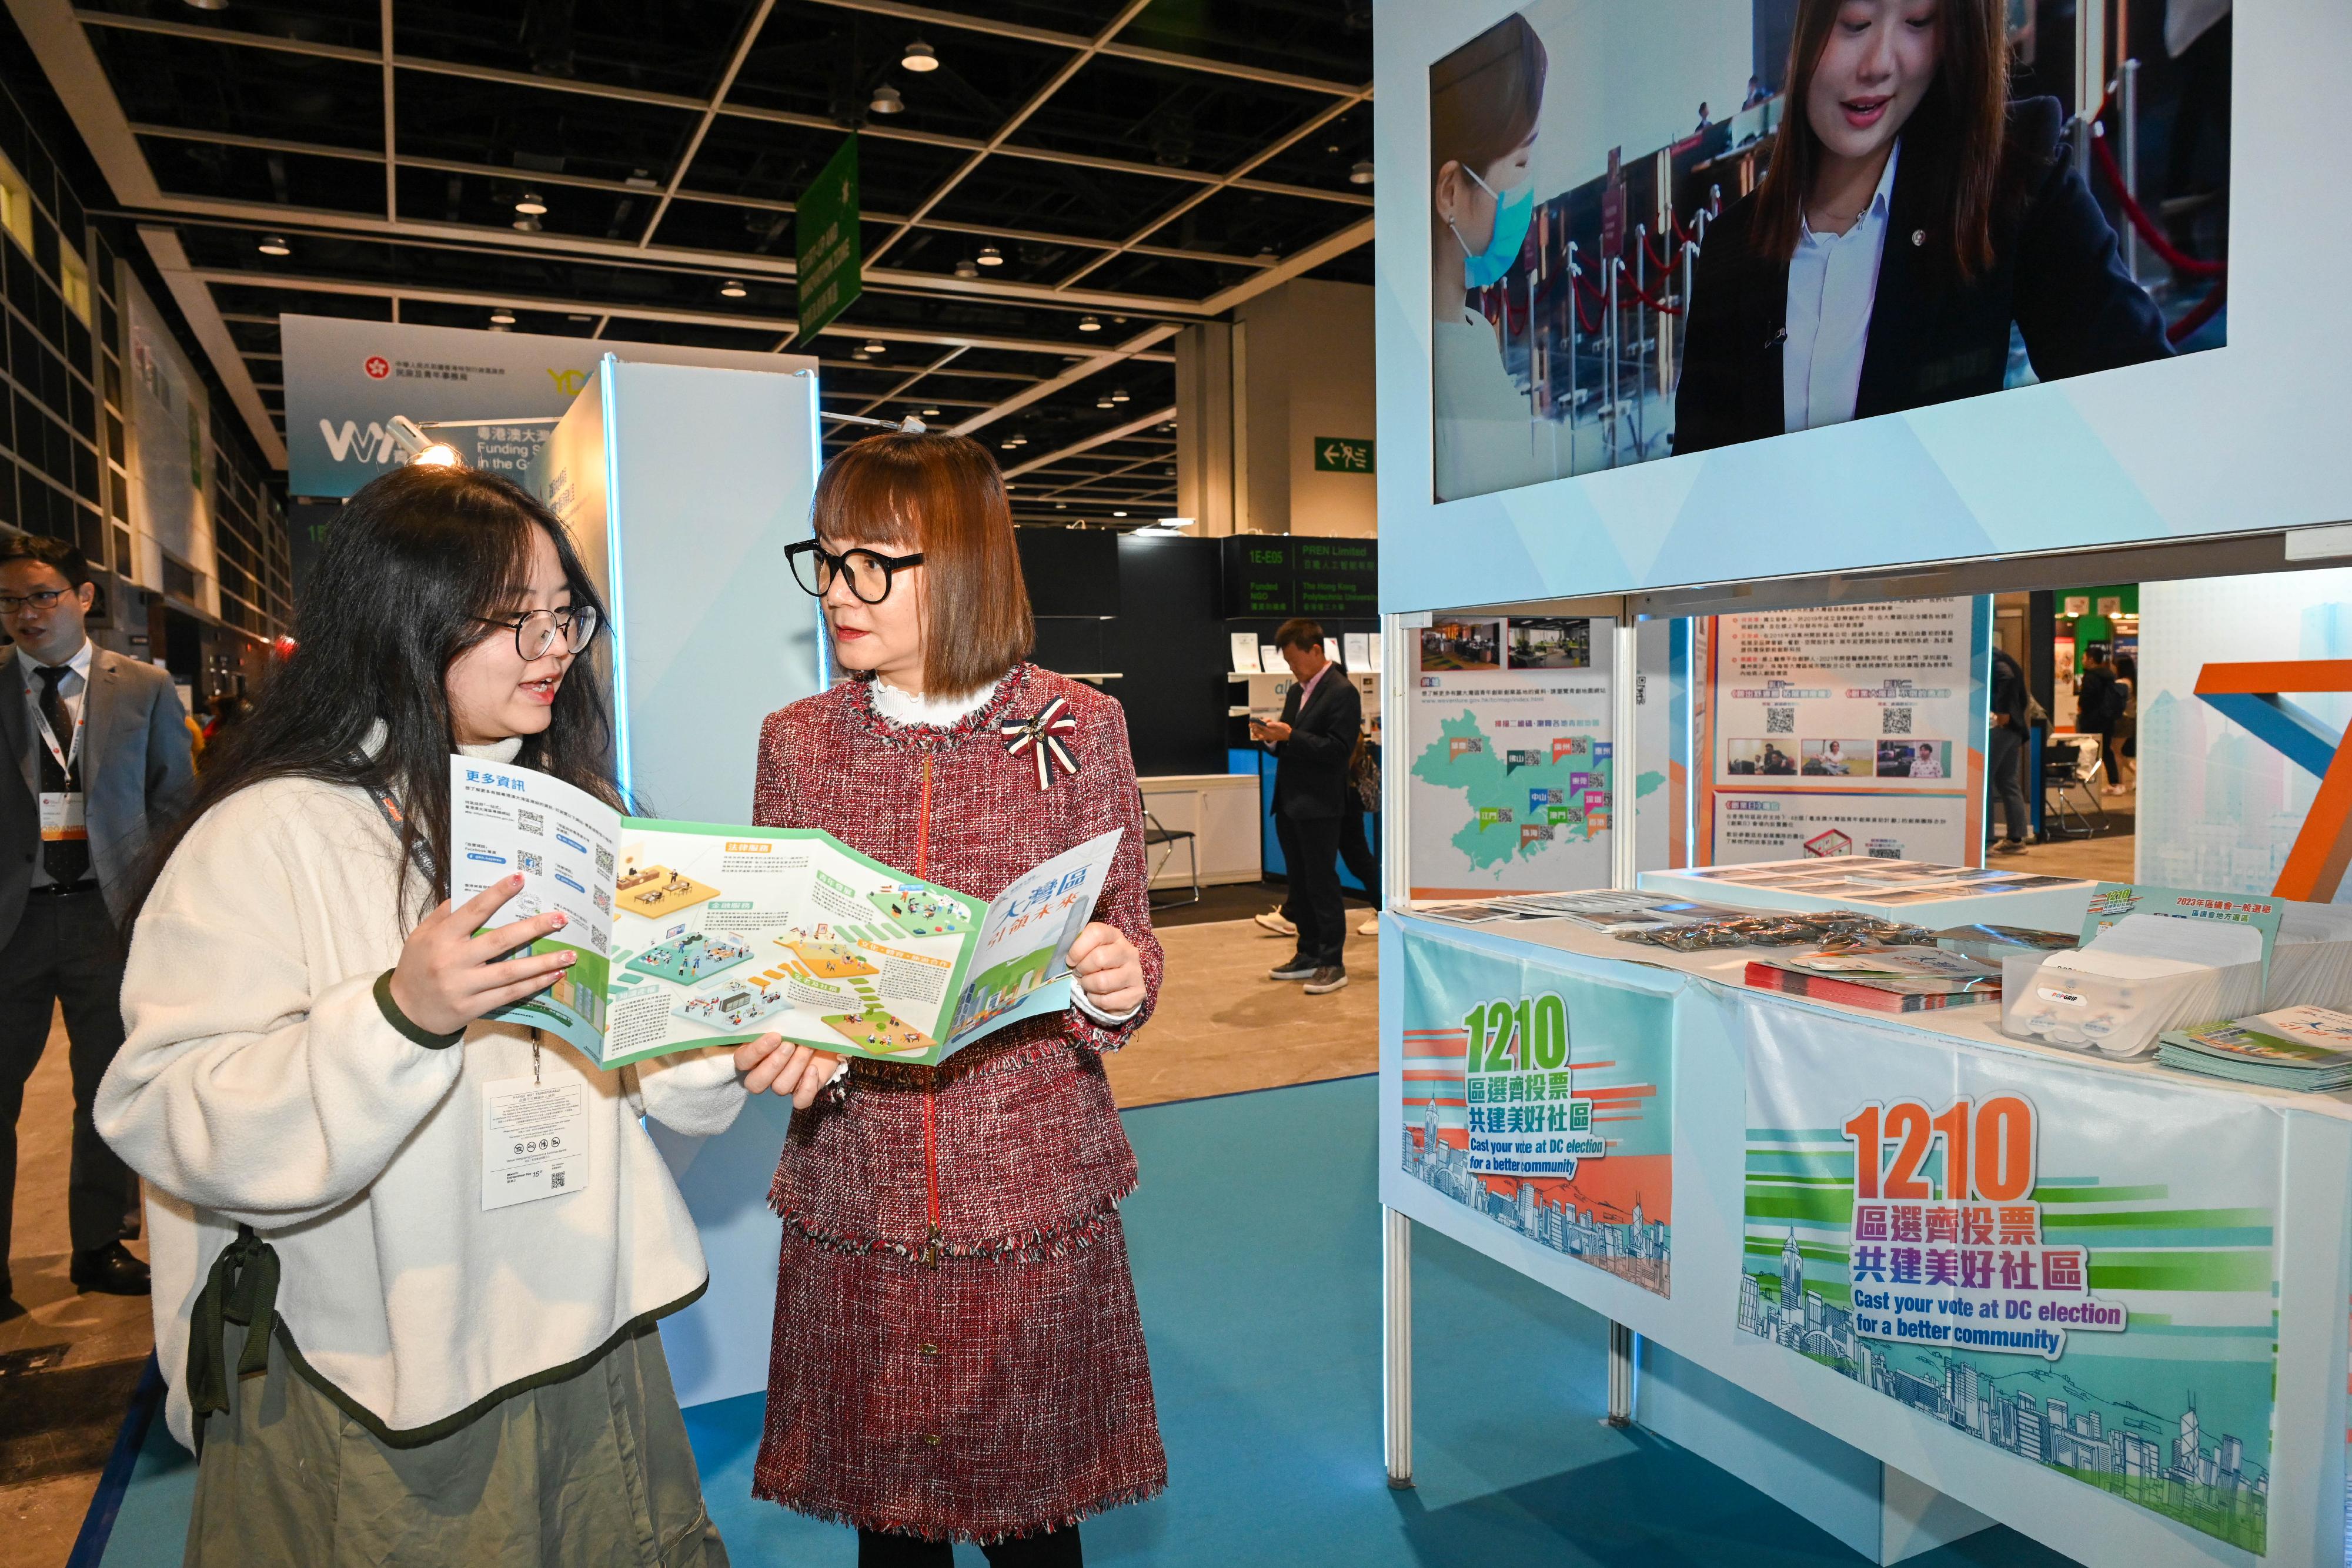 The Commissioner for the Development of the Guangdong-Hong Kong-Macao Greater Bay Area, Ms Maisie Chan (right), visits the Guangdong-Hong Kong-Macao Greater Bay Area Development Office's exhibition booth at the Entrepreneur Day exhibition today (December 7).